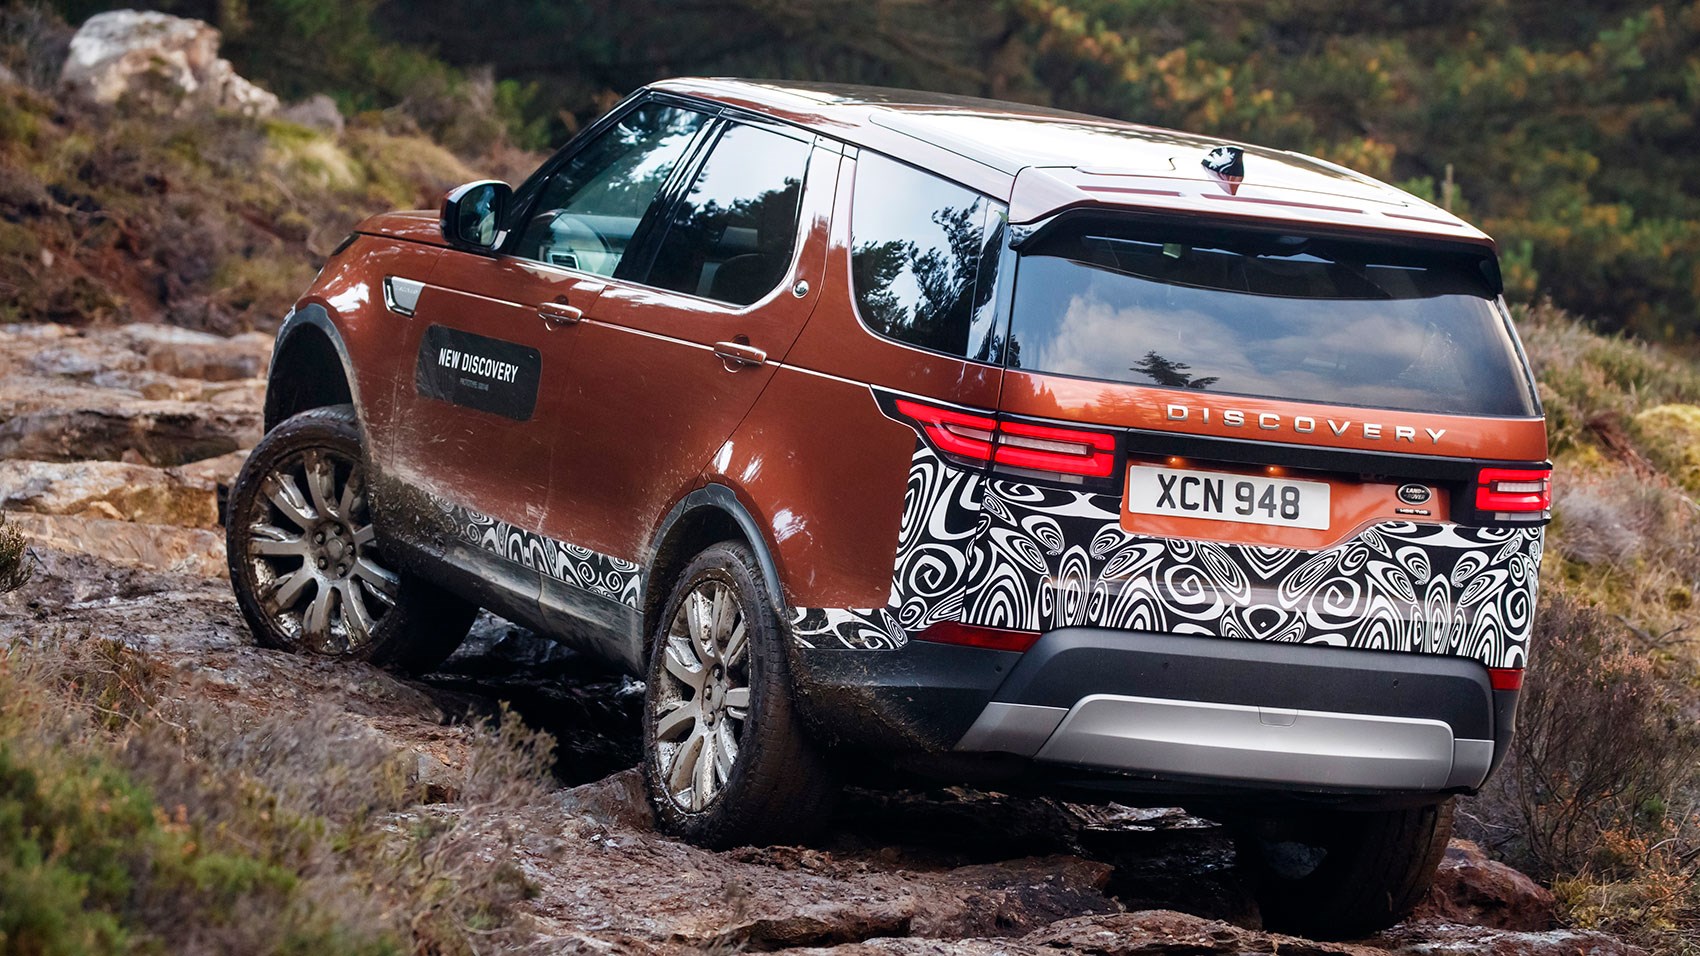 Тест дискавери. Land Rover Discovery 5. Ленд Ровер Дискавери 2017. Ленд Ровер Дискавери 5 поколения. Land Rover Discovery 5 Offroad.